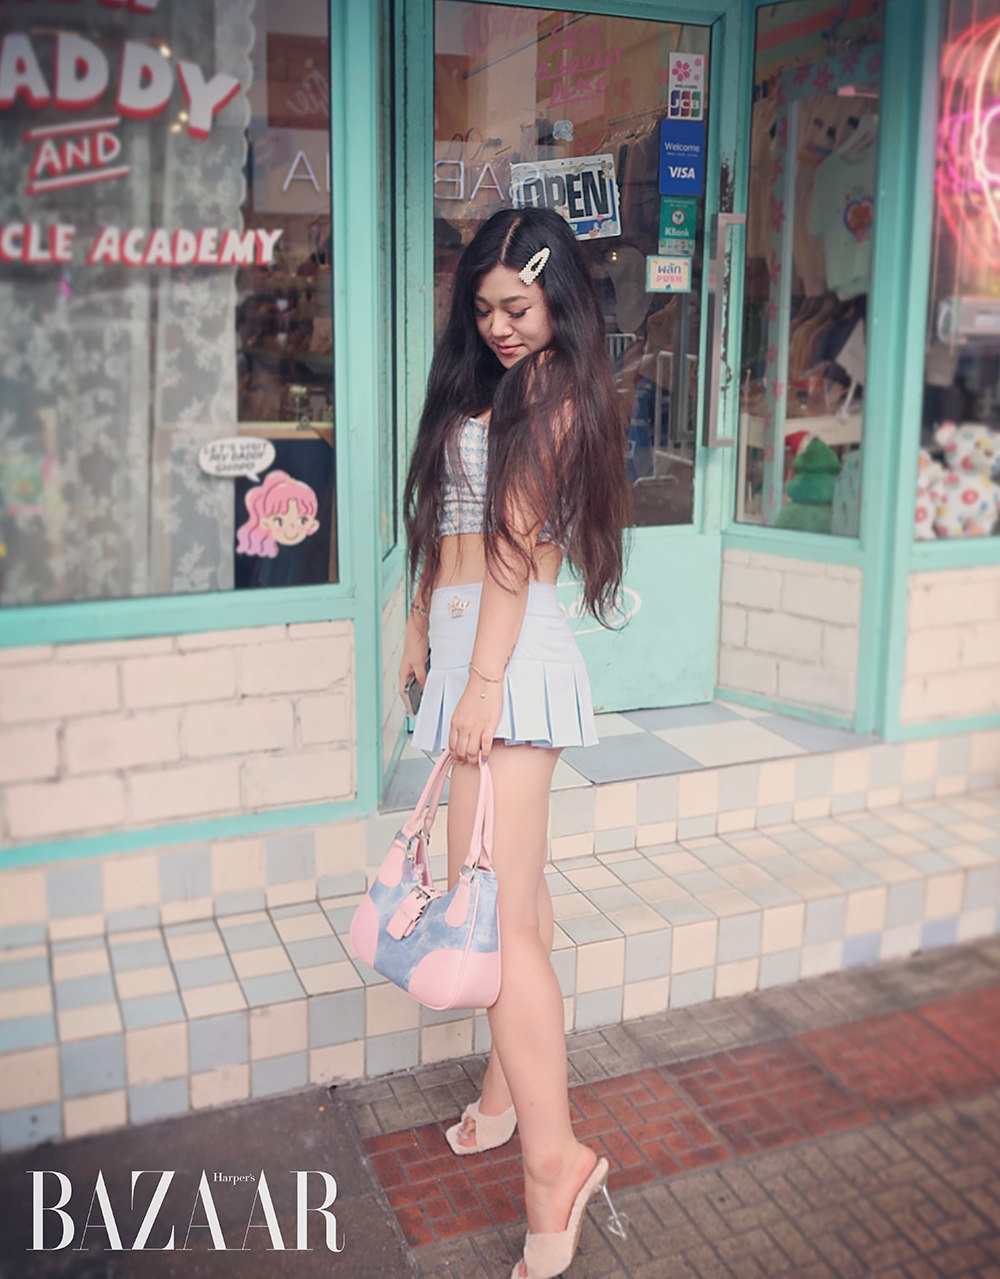 Sali Kimi’s Barbie-inspired vacation photos shot in Asia 2